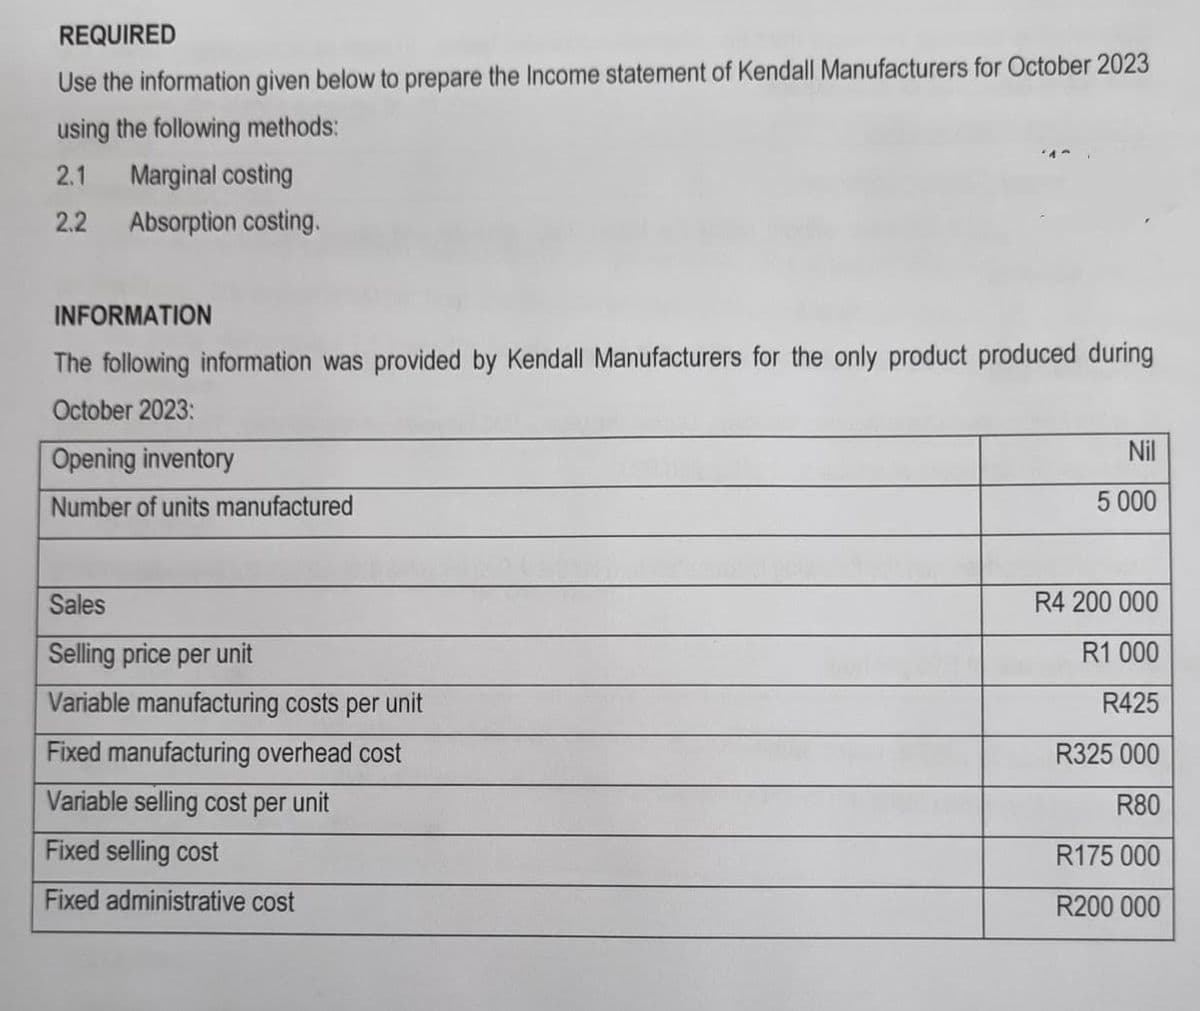 REQUIRED
Use the information given below to prepare the Income statement of Kendall Manufacturers for October 2023
using the following methods:
2.1 Marginal costing
2.2 Absorption costing.
INFORMATION
The following information was provided by Kendall Manufacturers for the only product produced during
October 2023:
Opening inventory
Number of units manufactured
Sales
Selling price per unit
Variable manufacturing costs per unit
Fixed manufacturing overhead cost
Variable selling cost per unit
Fixed selling cost
Fixed administrative cost
Nil
5 000
R4 200 000
R1 000
R425
R325 000
R80
R175 000
R200 000